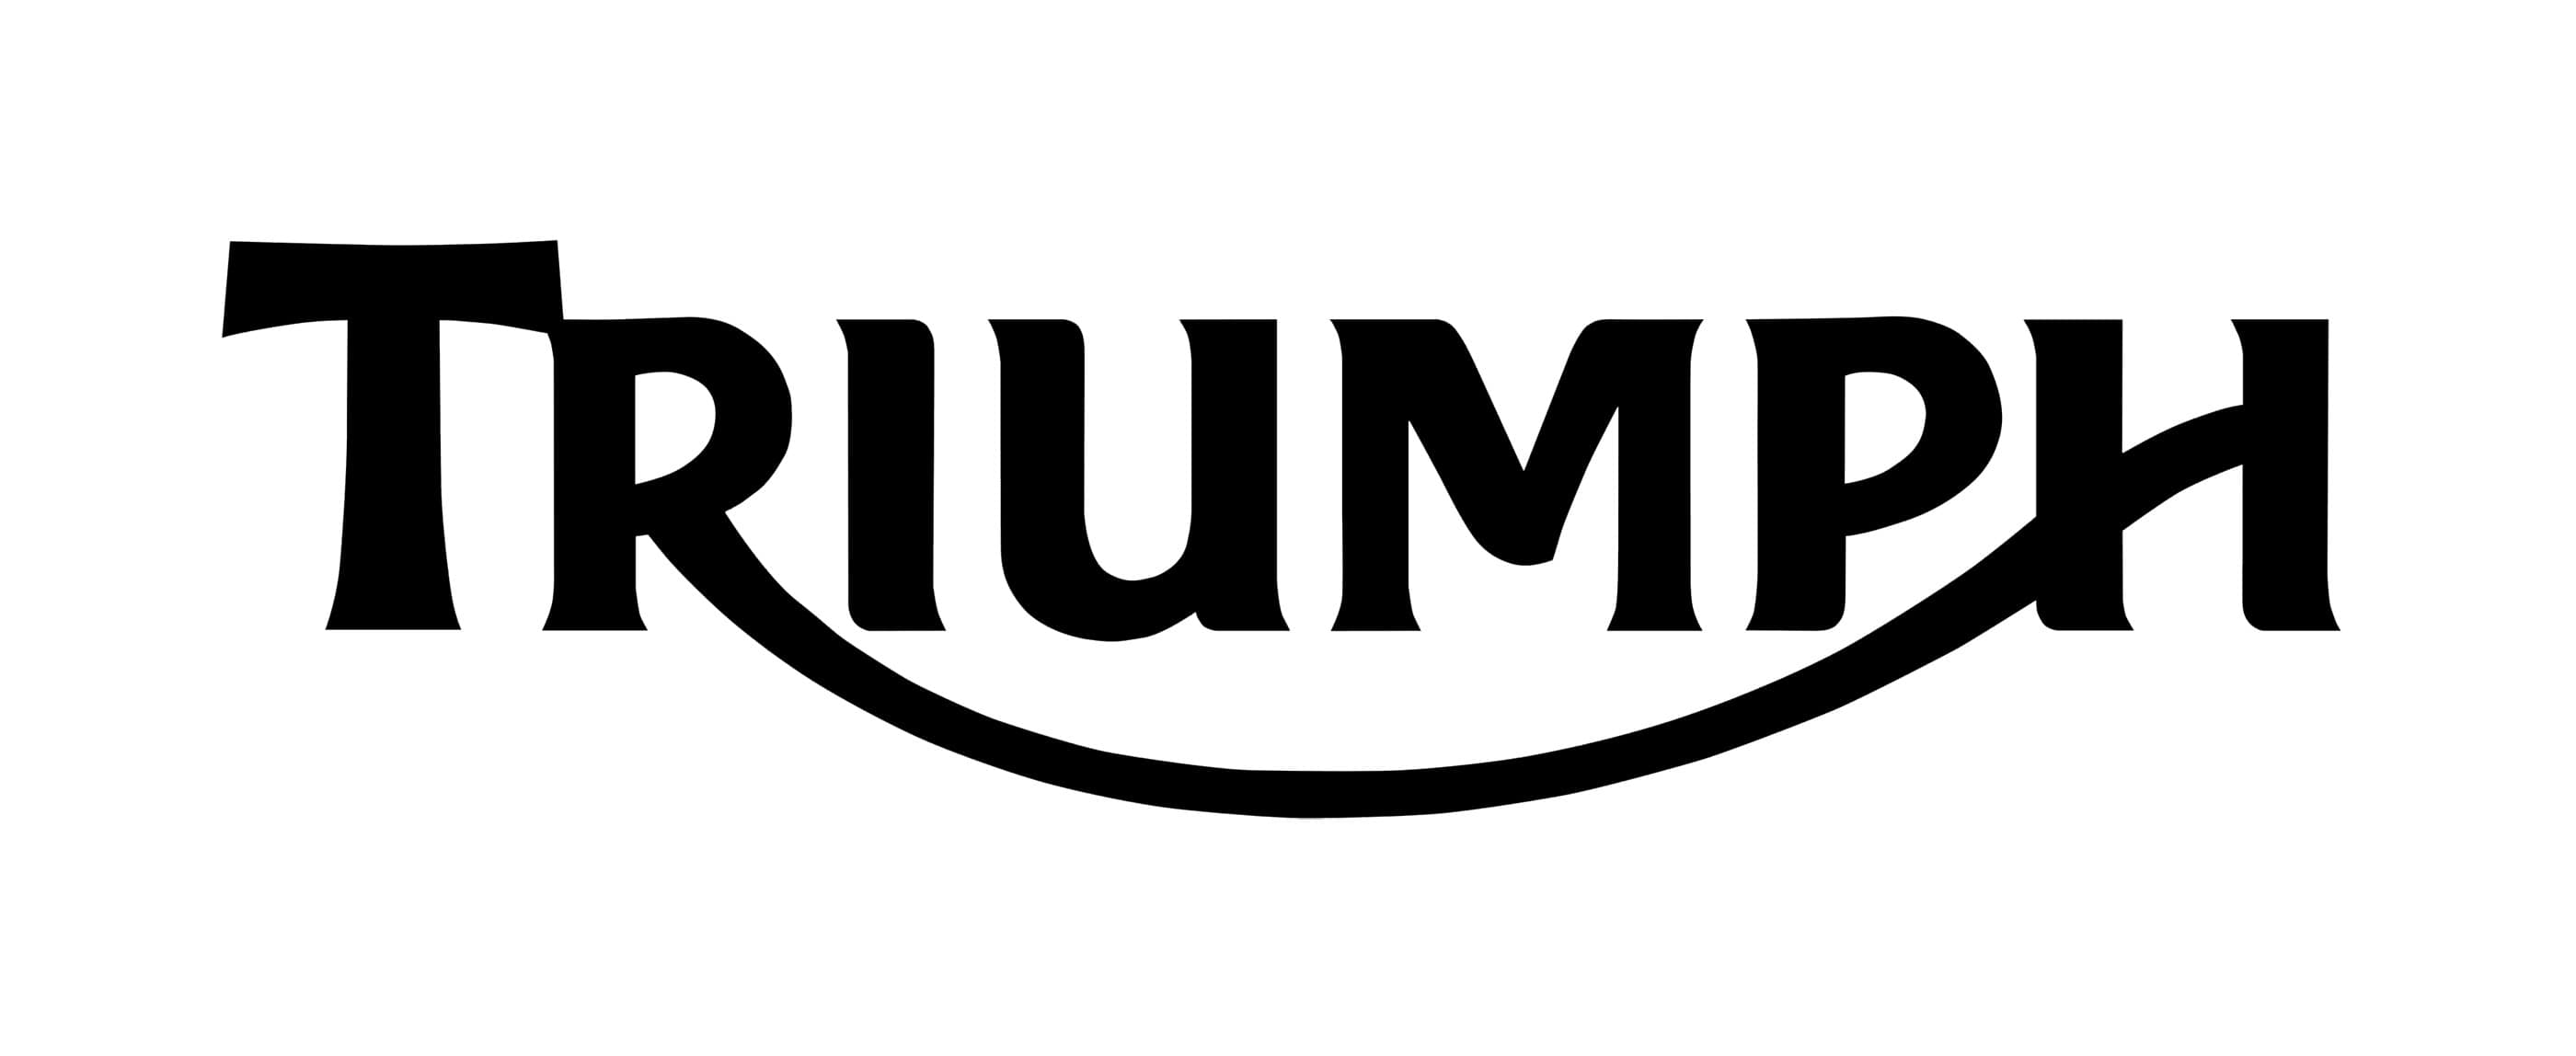 All Motorcycle Logo - Triumph logo: history, evolution, meaning | Motorcycle Brands